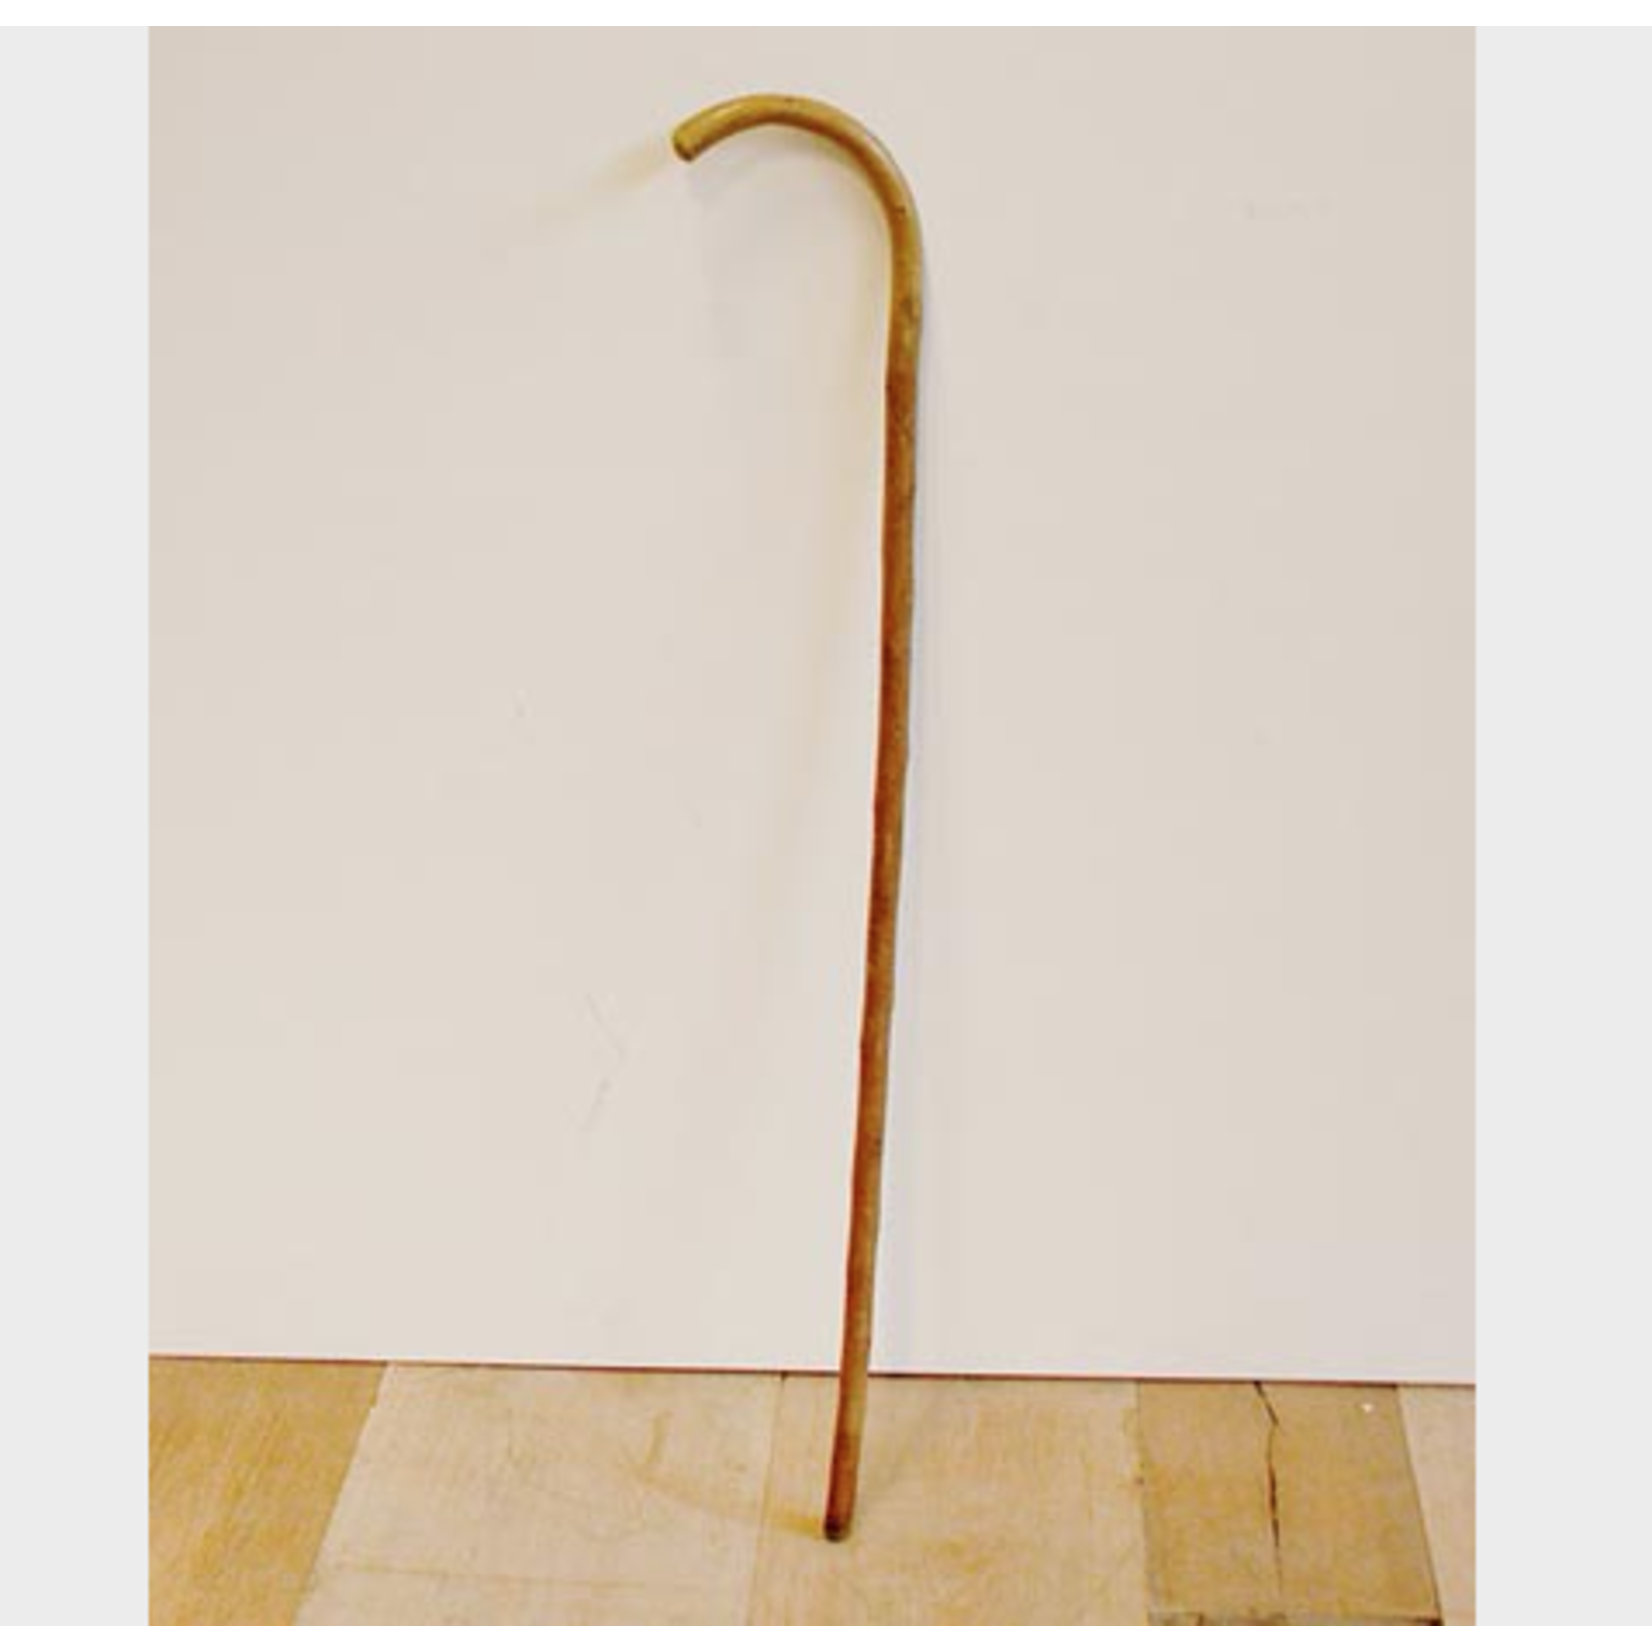 CHEHOMA OLD WALKING STICK WITH BADGES